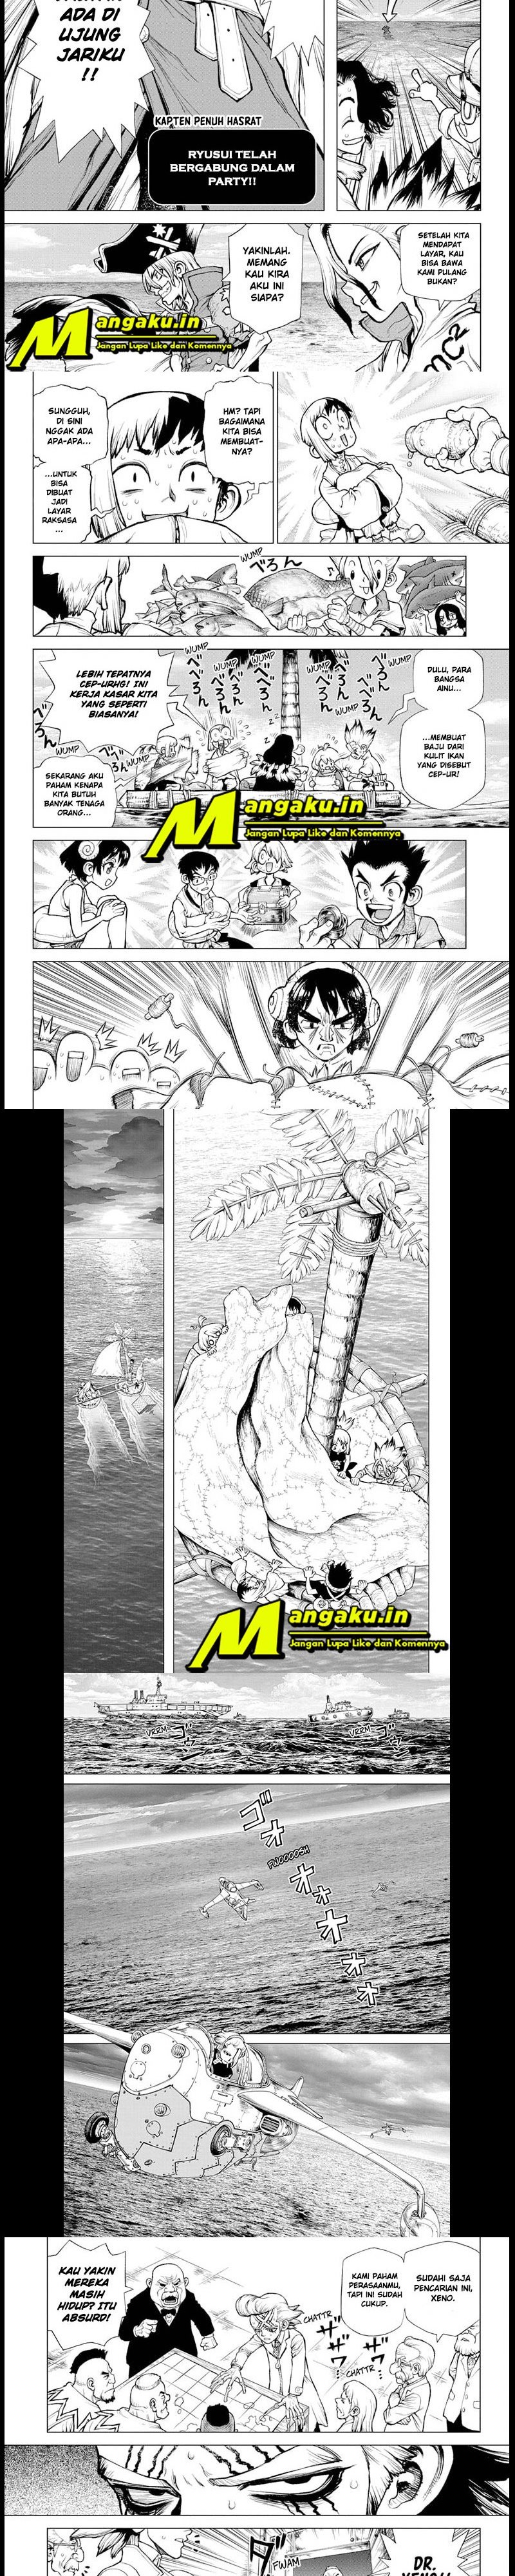 Dr. Stone Chapter 232.3 6